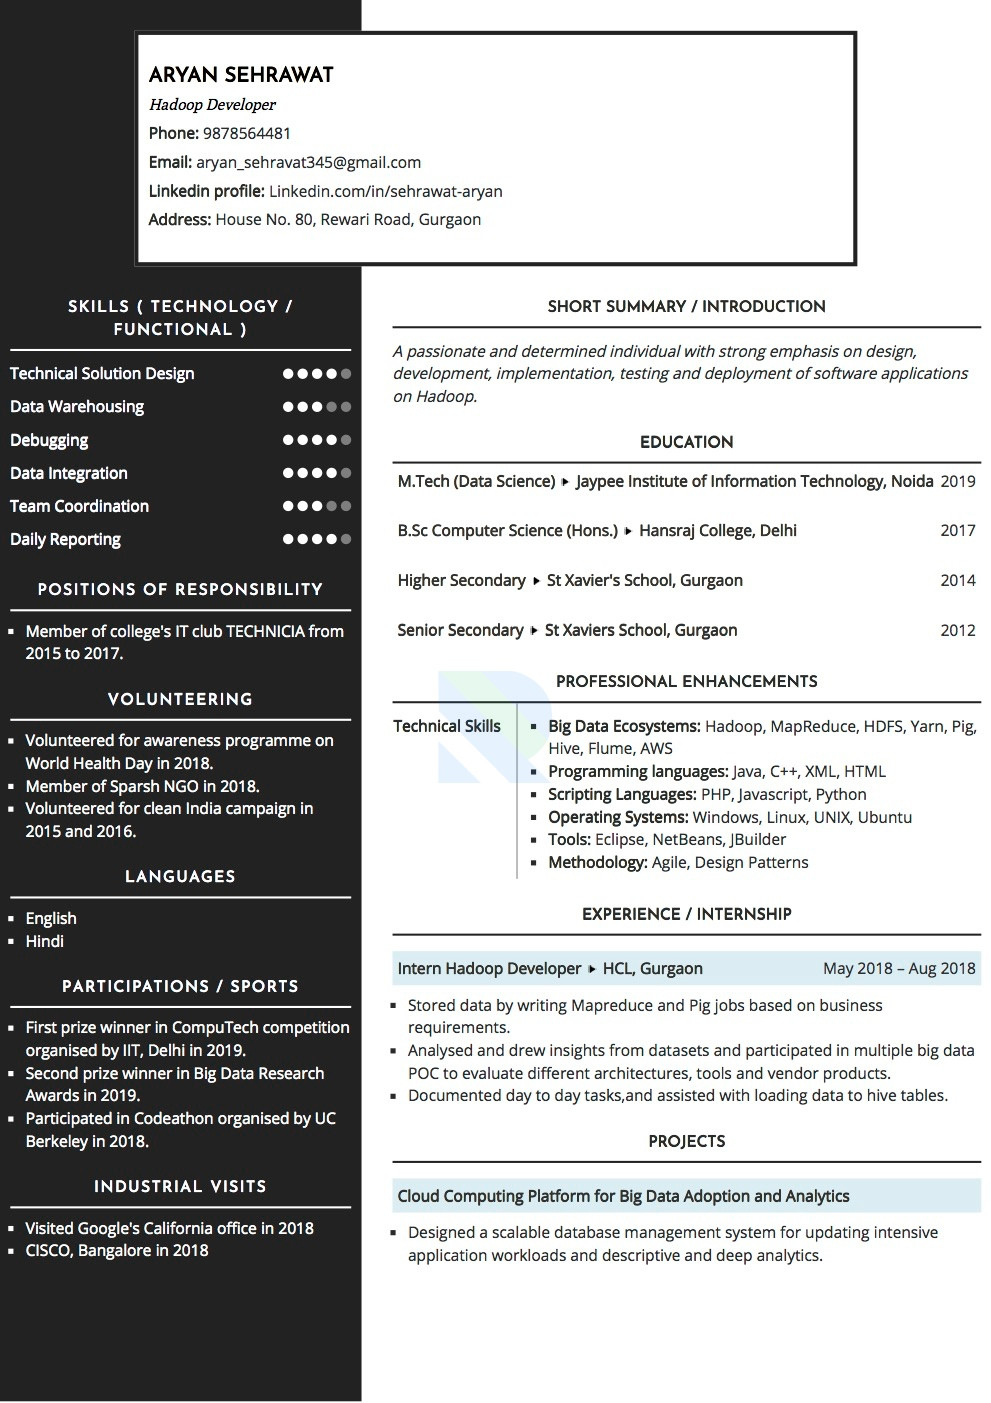 Business Analyst with Hadoop Experince Sample Resume Sample Resume Of Hadoop Developer with Template & Writing Guide …